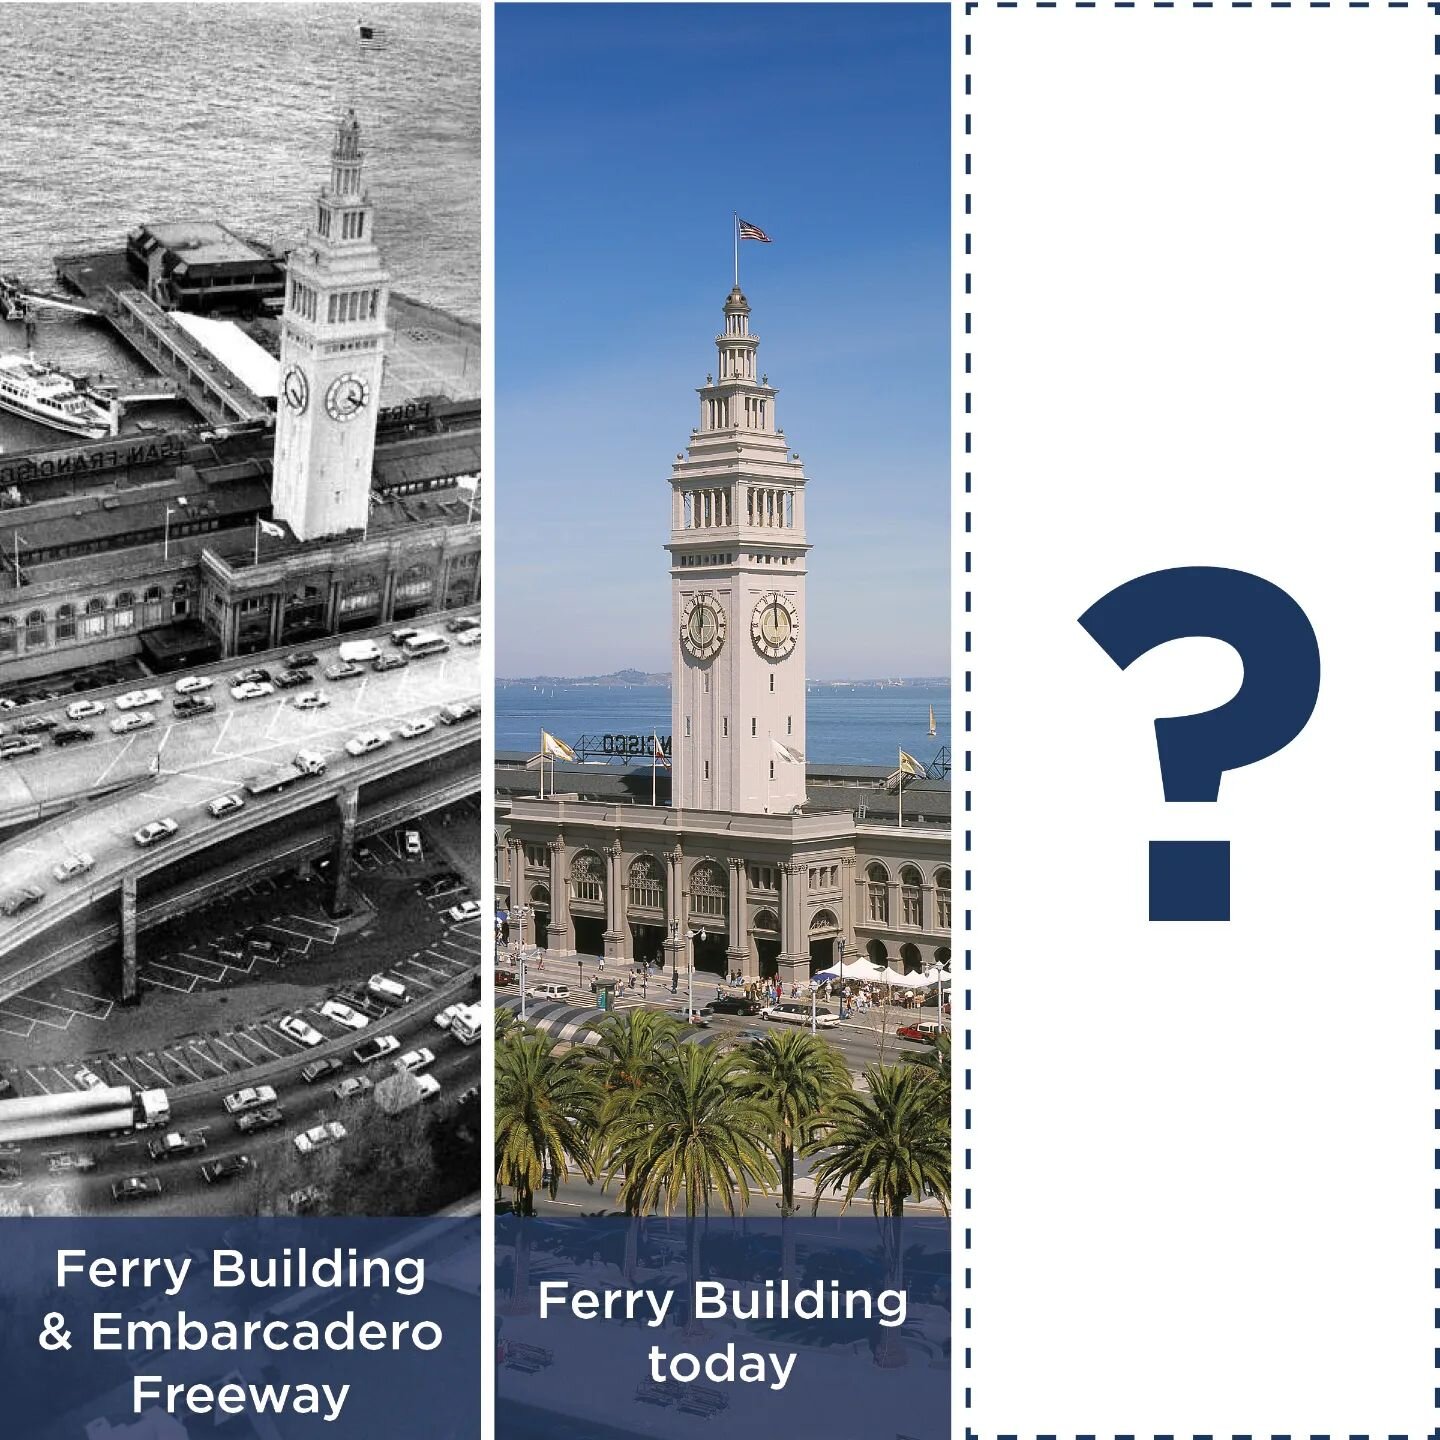 Interested in helping to shape the future of San Francisco&rsquo;s waterfront? We want to hear from you!
Since 2020, we&rsquo;ve been collaborating with @sf_port in their efforts to ensure the waterfront is resilient to hazards and is increasingly ac